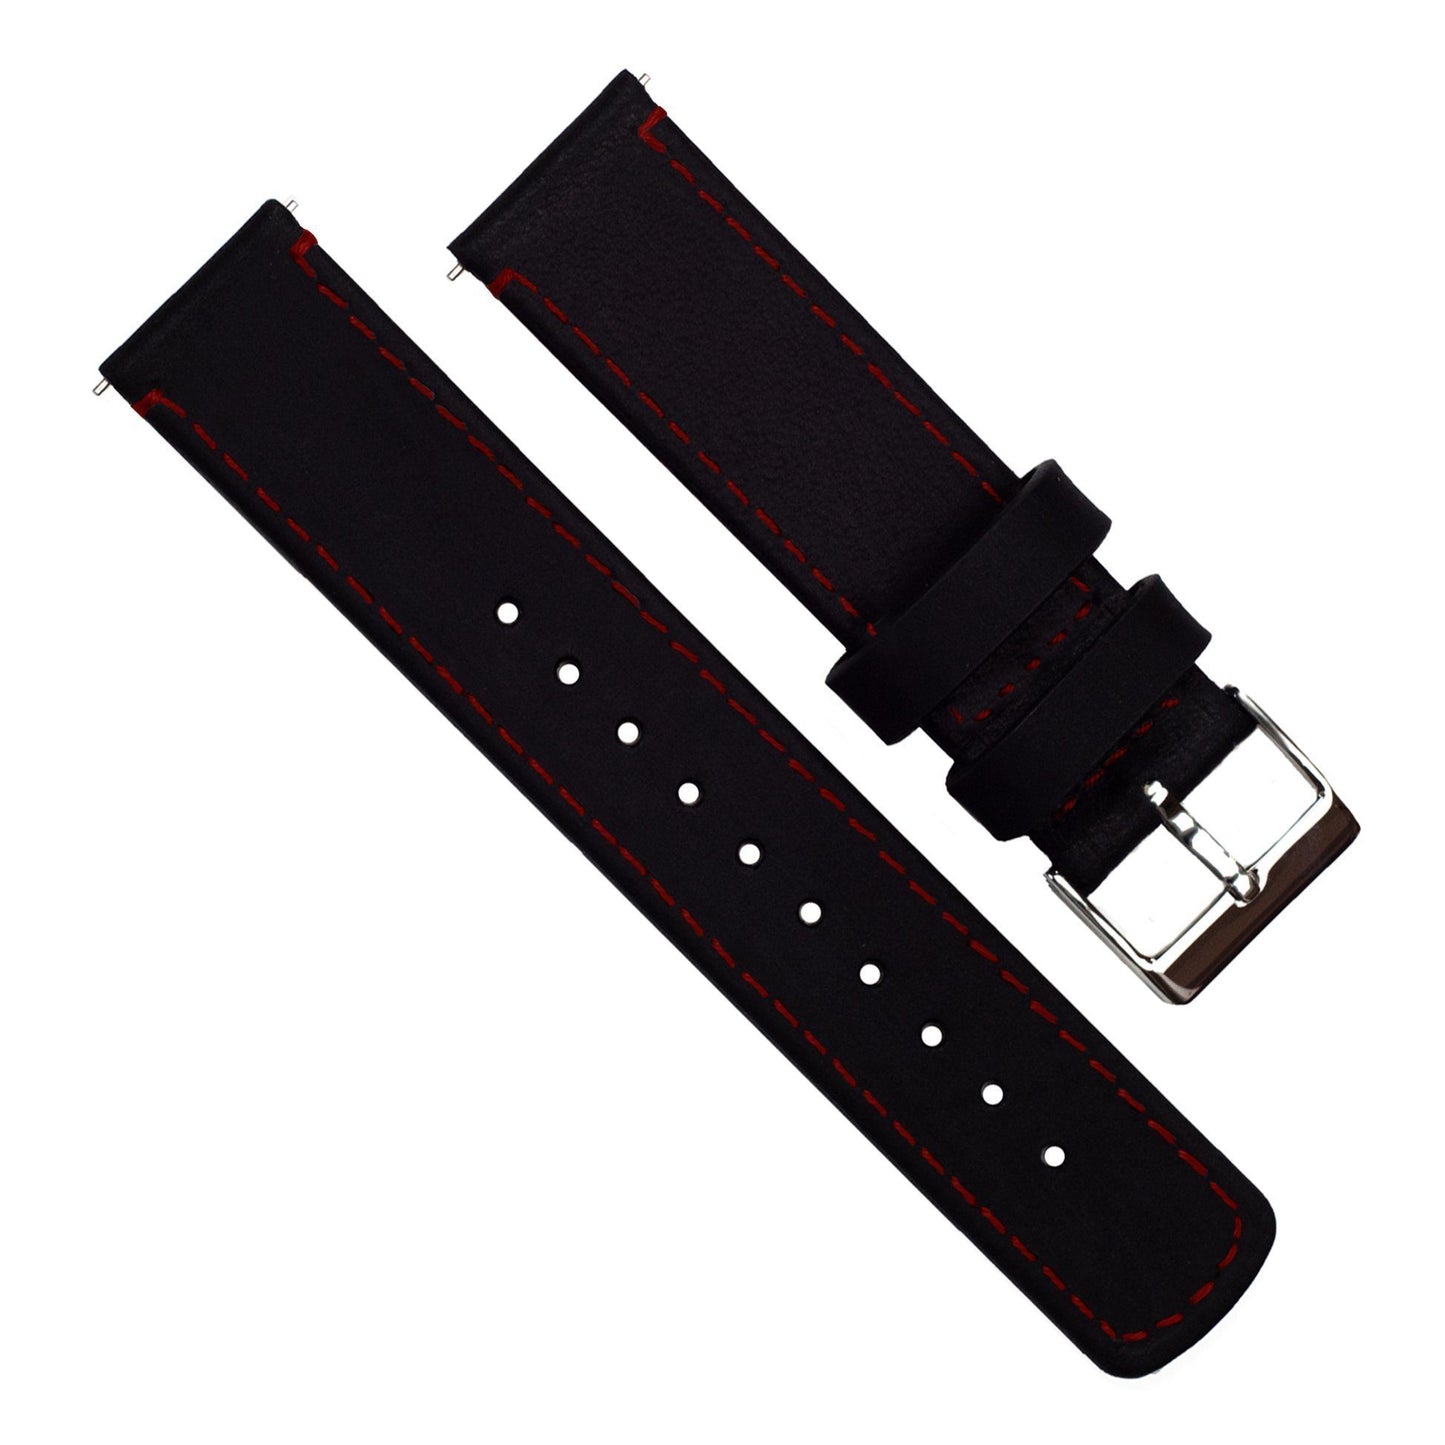 Withings Nokia Activité and Steel HR | Black Leather & Crimson Red Stitching - Barton Watch Bands